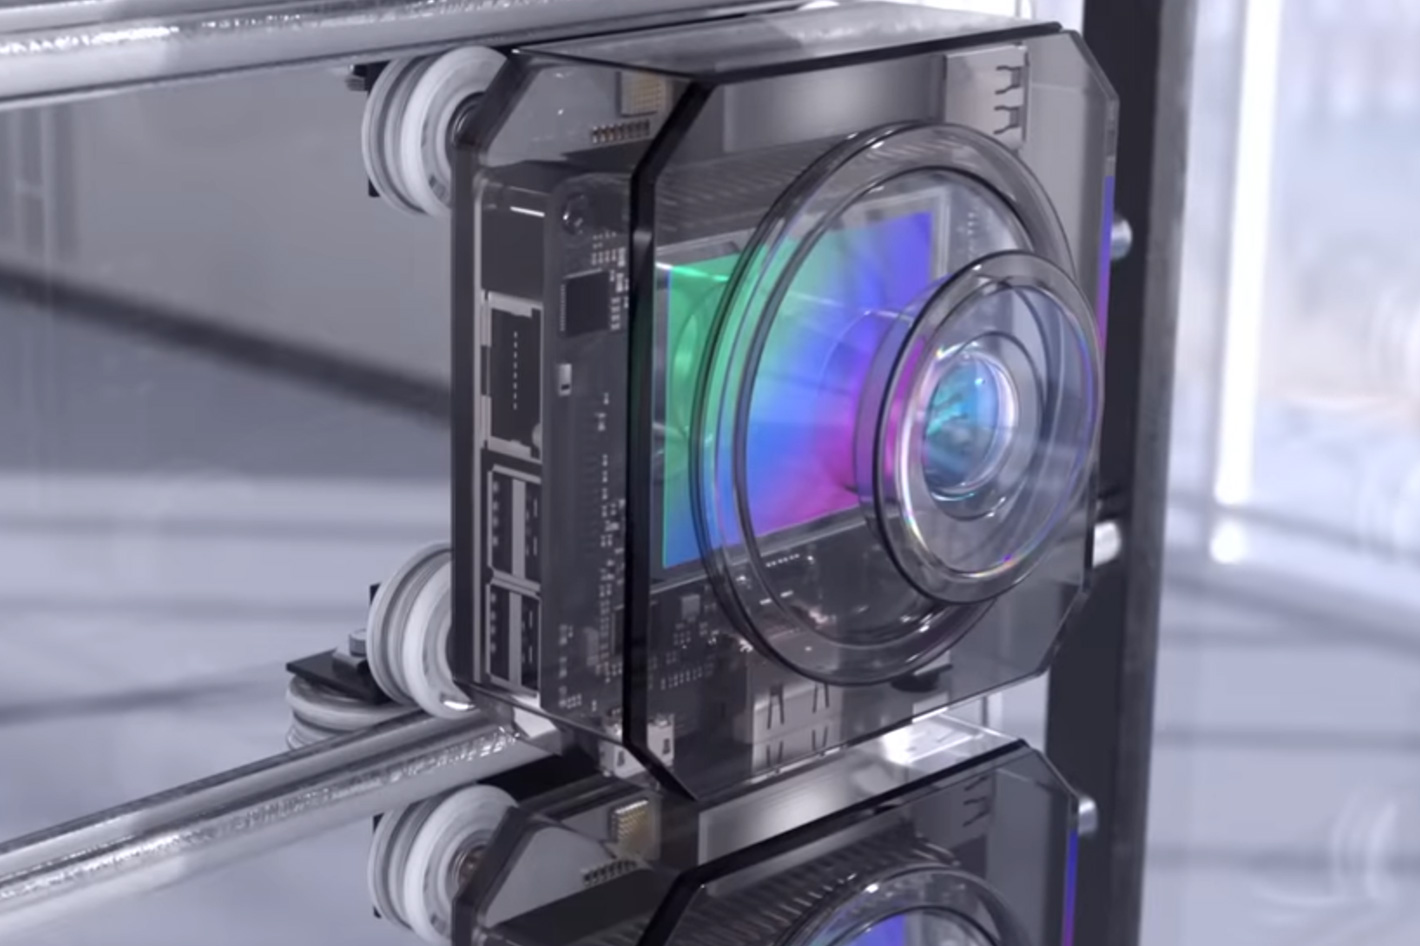 ISOCELL HP3: a second 200MP image sensor from Samsung